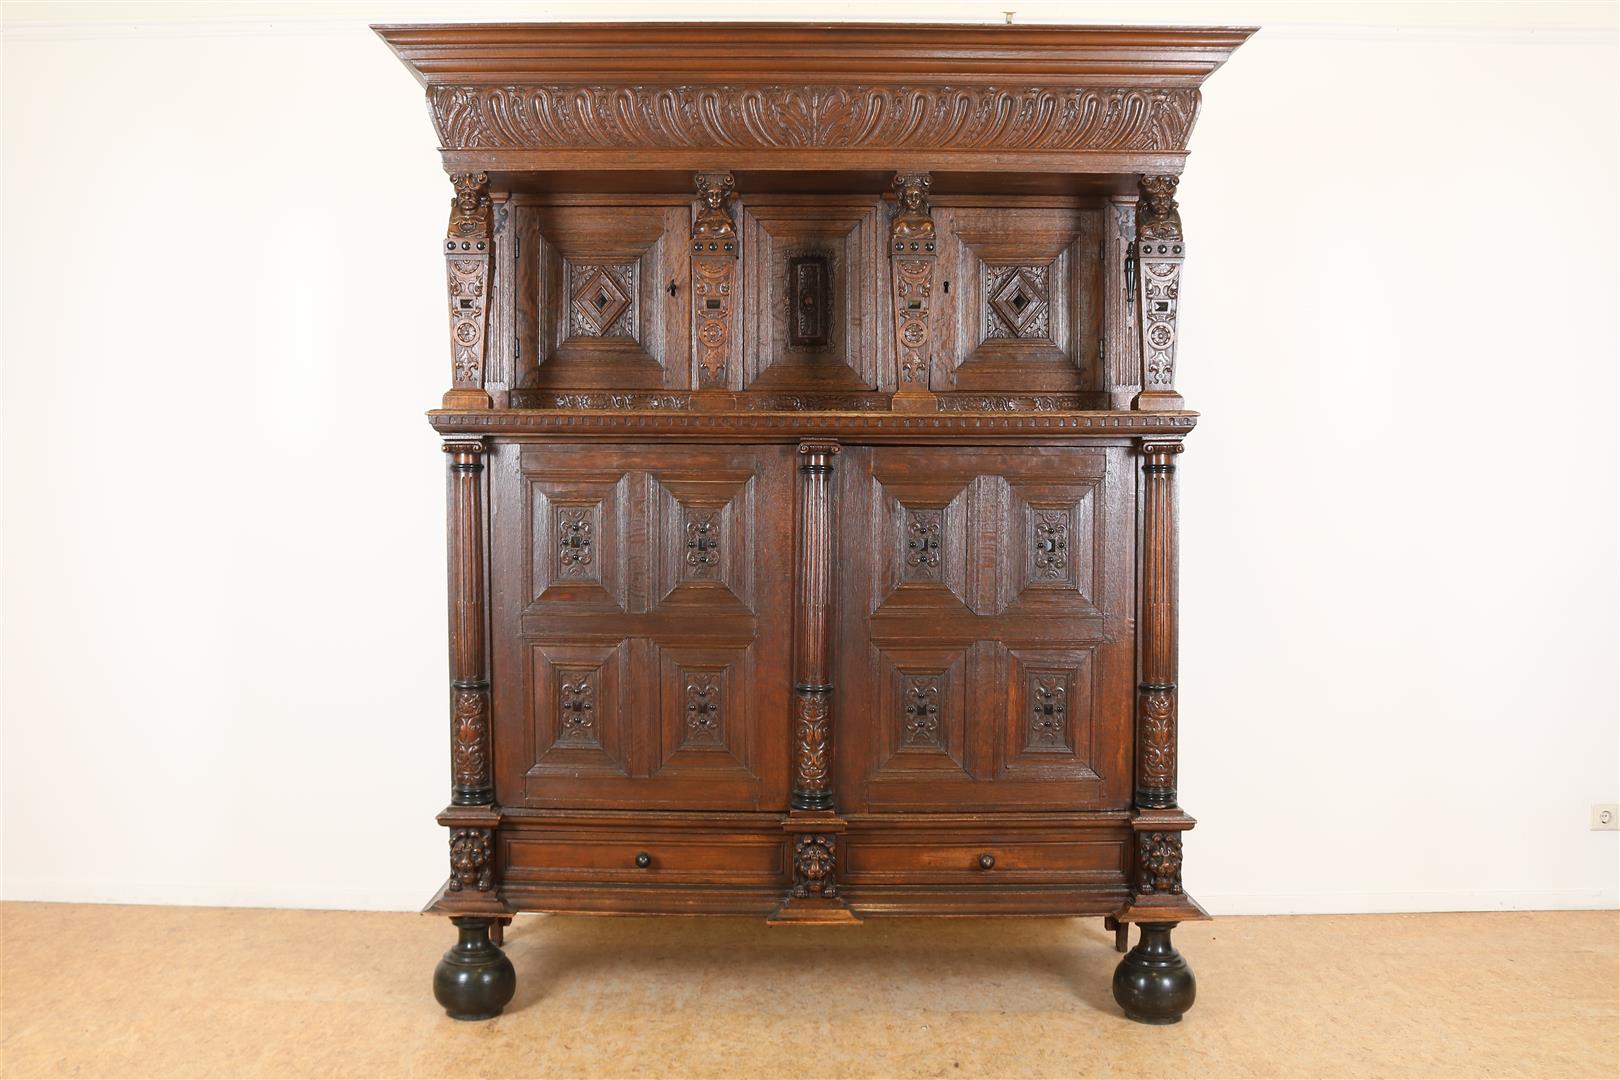 Oak Renaissance cabinet with richly carved crest, recessed elevation with 3 panel doors resting on 4